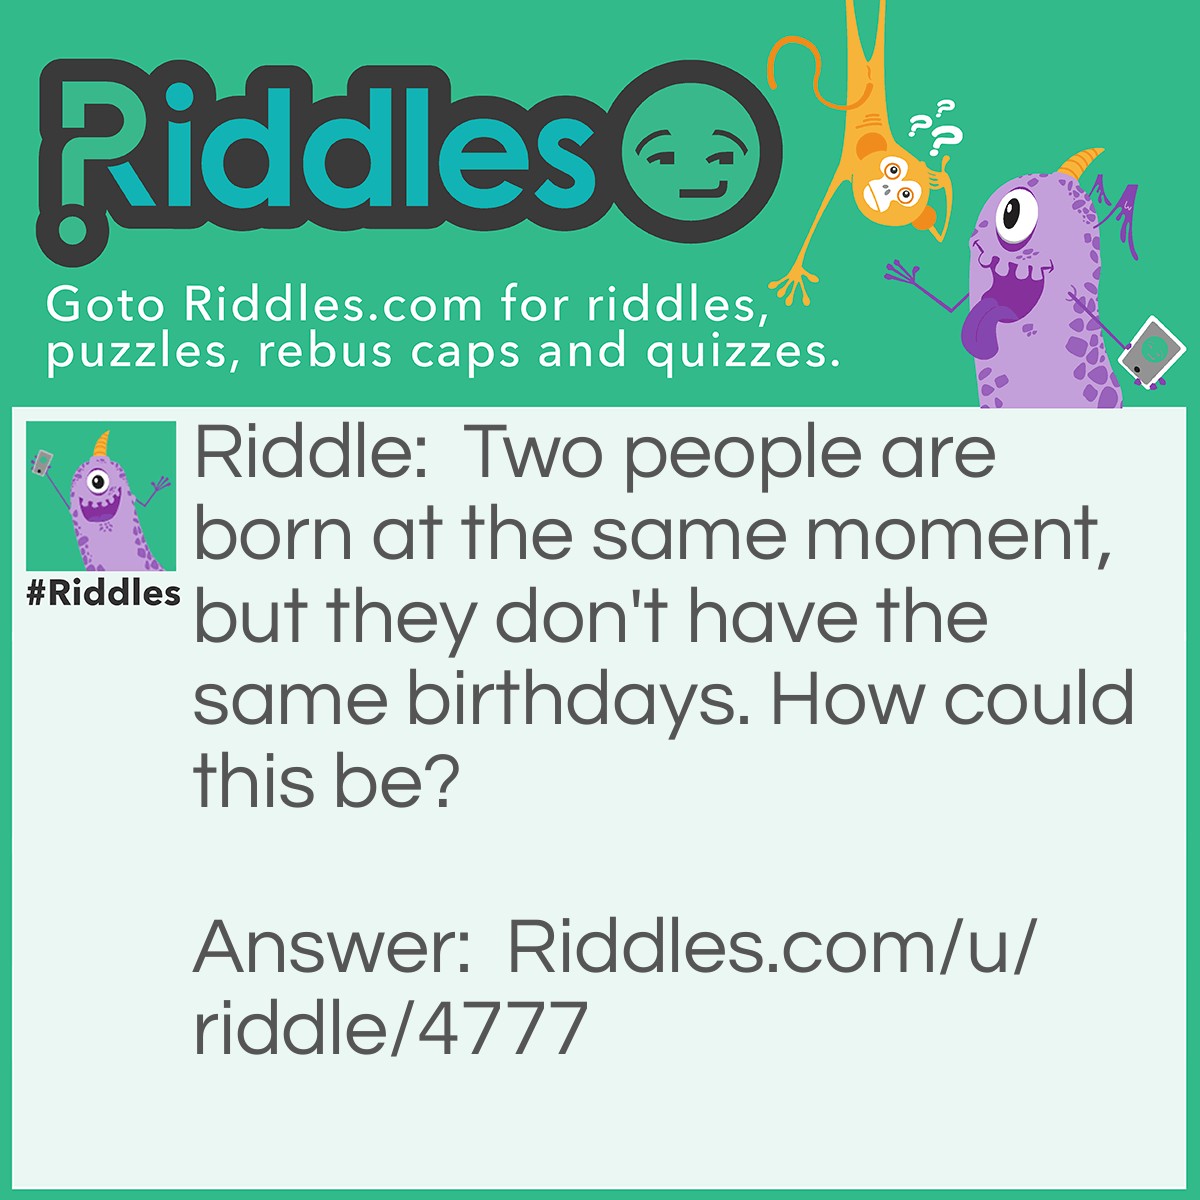 Riddle: Two people are born at the same moment, but they don't have the same birthdays. How could this be? Answer: They are born in different time zones.